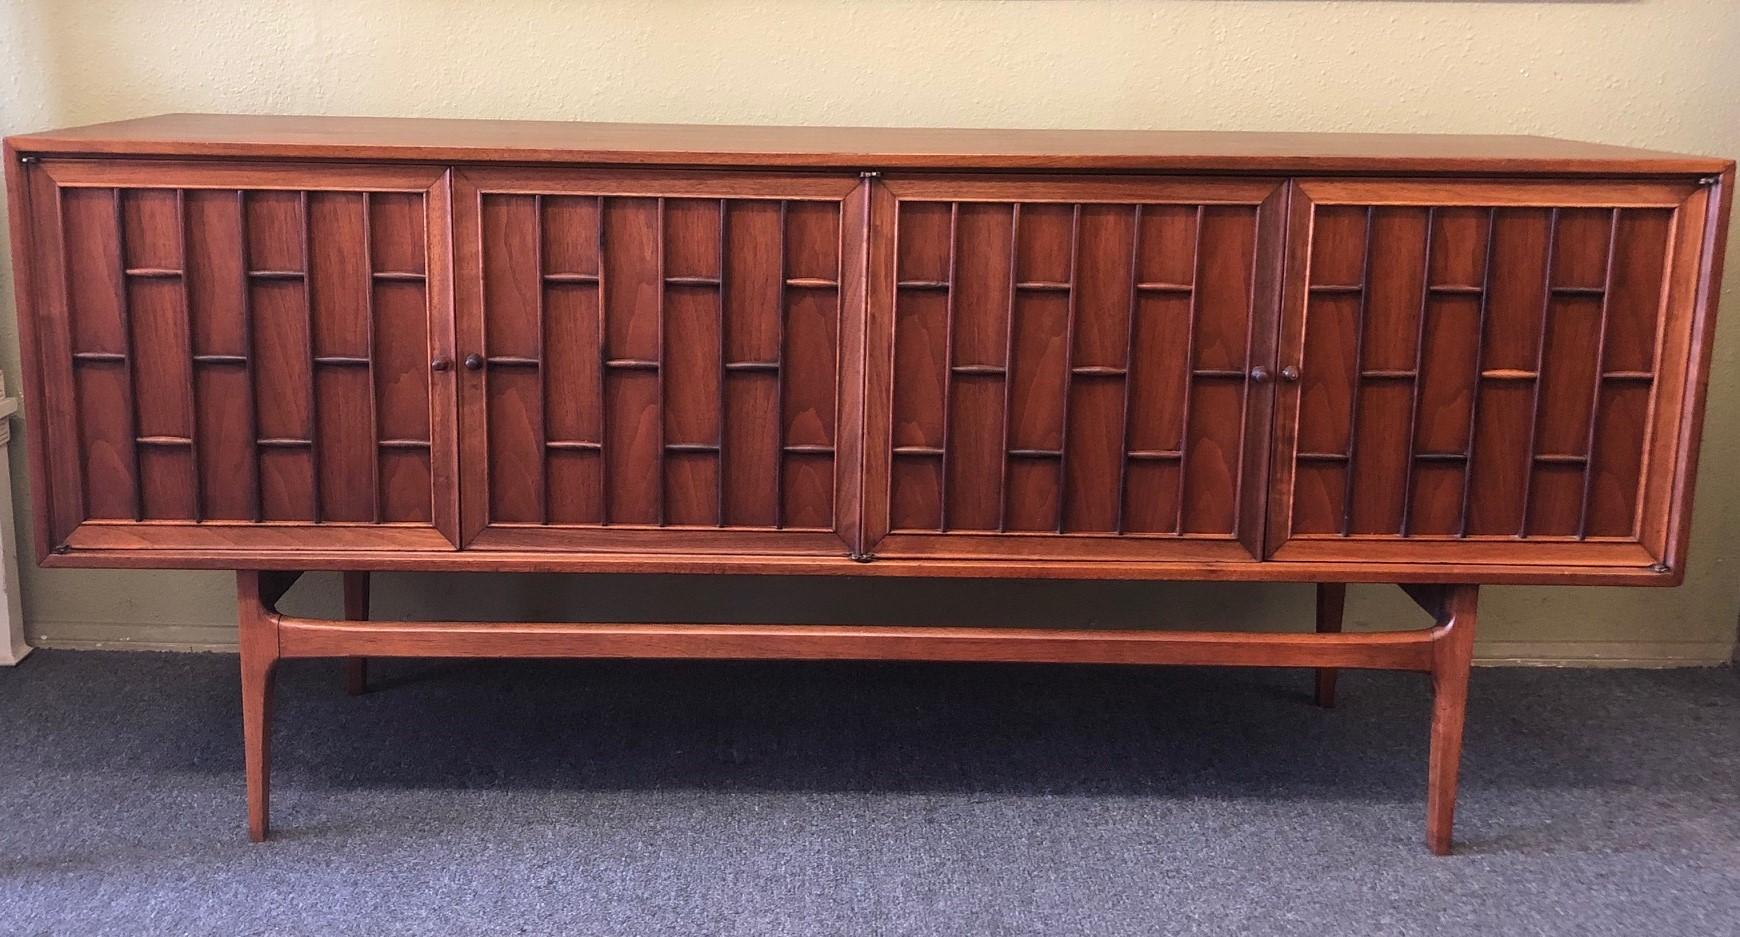 Gorgeous Mid-Century Modern walnut and rosewood credenza / buffet by Thomasville, circa 1959. Thomasville produced only a small volume of exceptionally well-designed midcentury furniture of which this rare and handsome credenza is a shining example.